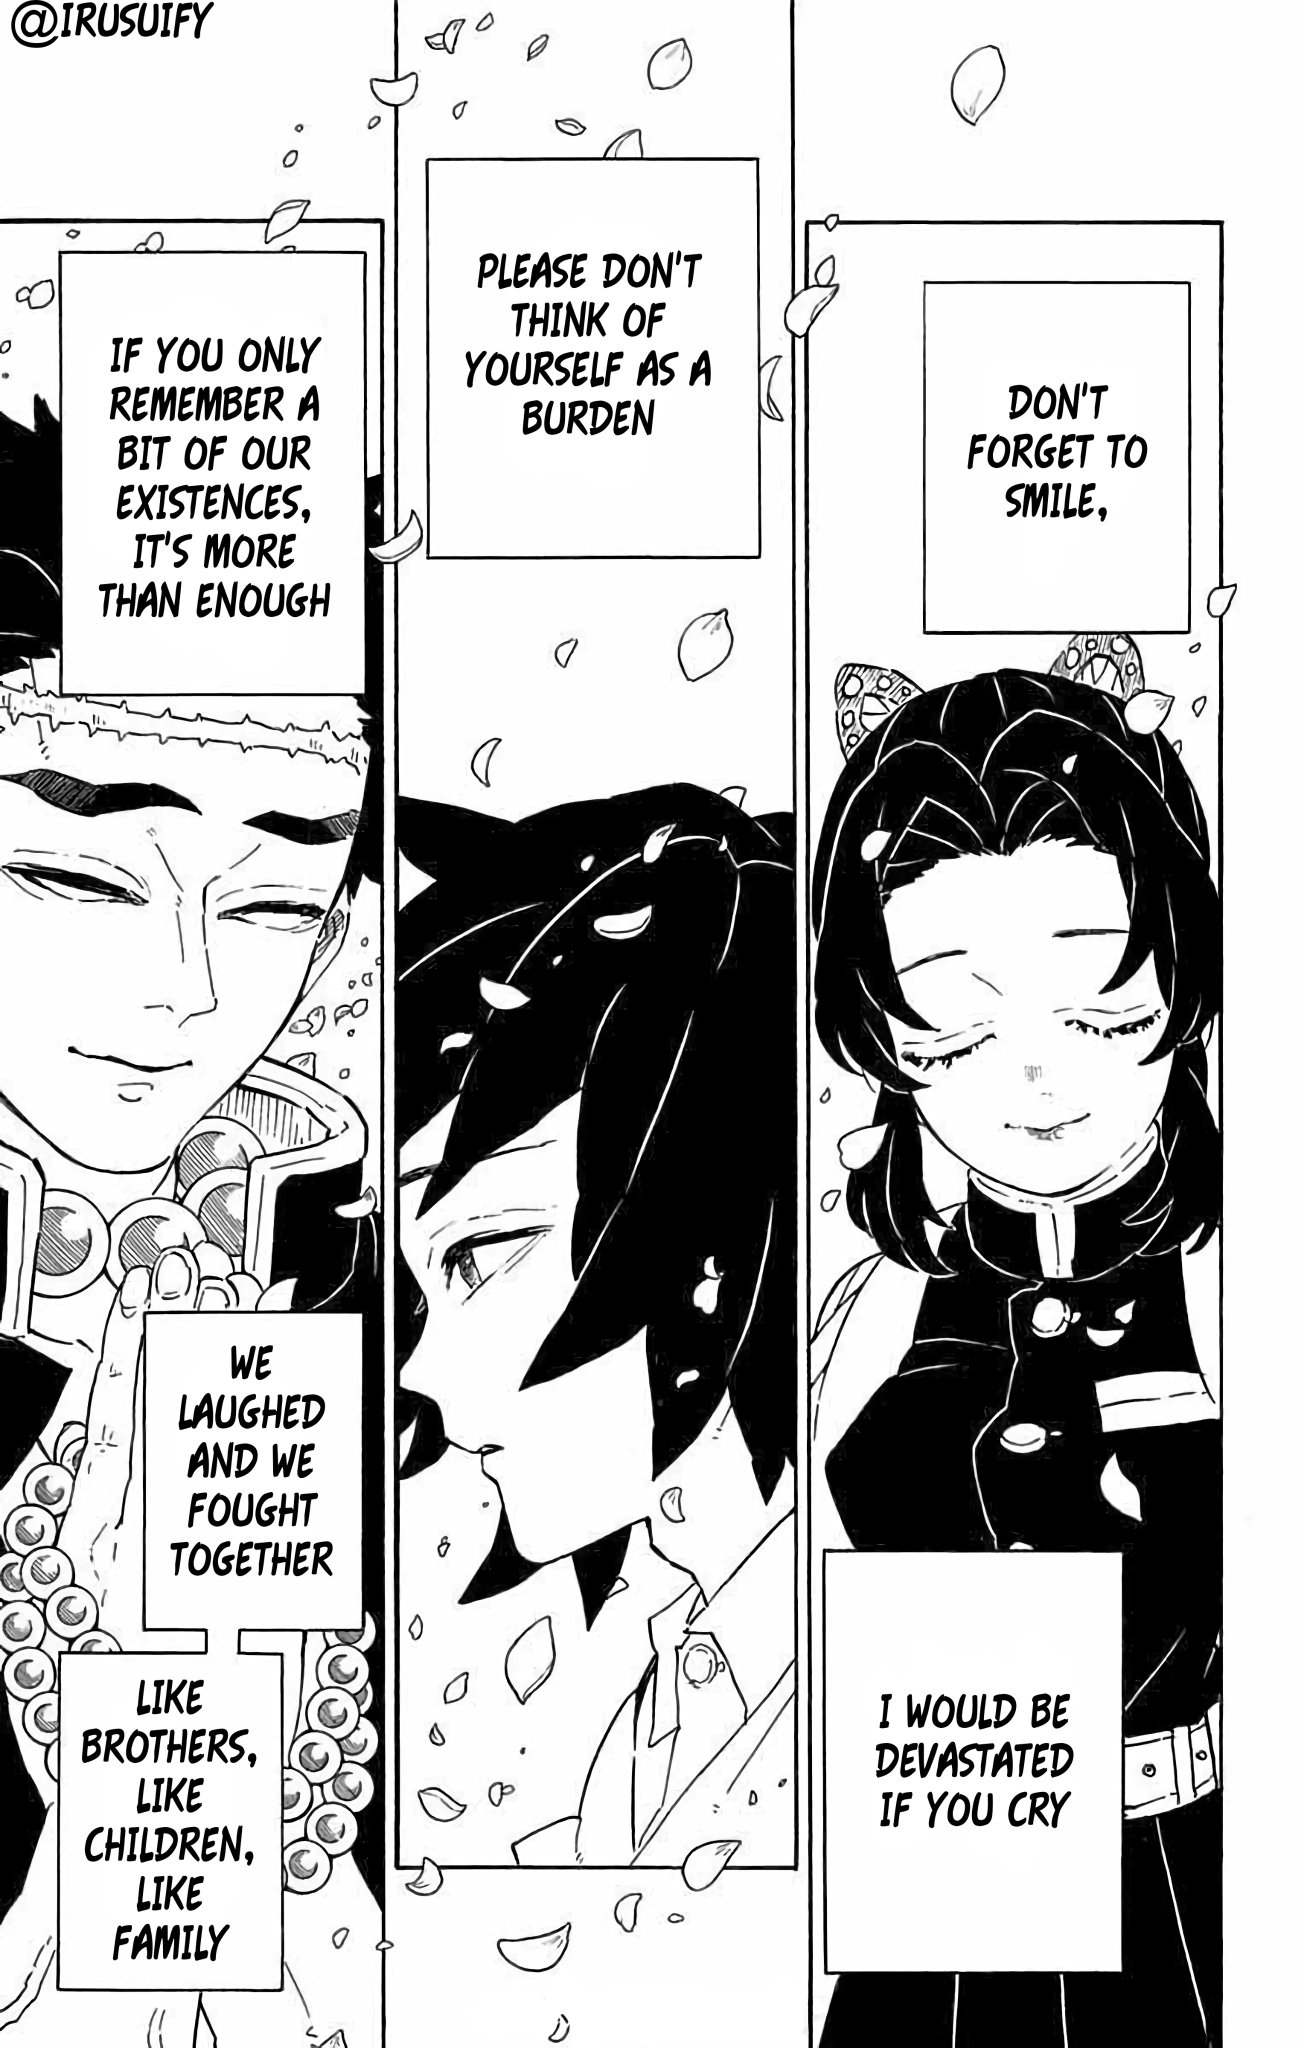 Irusu On Twitter Translation Demon Slayer Kimetsu No Yaiba Volume 23 Extra Pages Translation This Is A Combination Of All The Translations I Could Come Across In Order To Make A Near